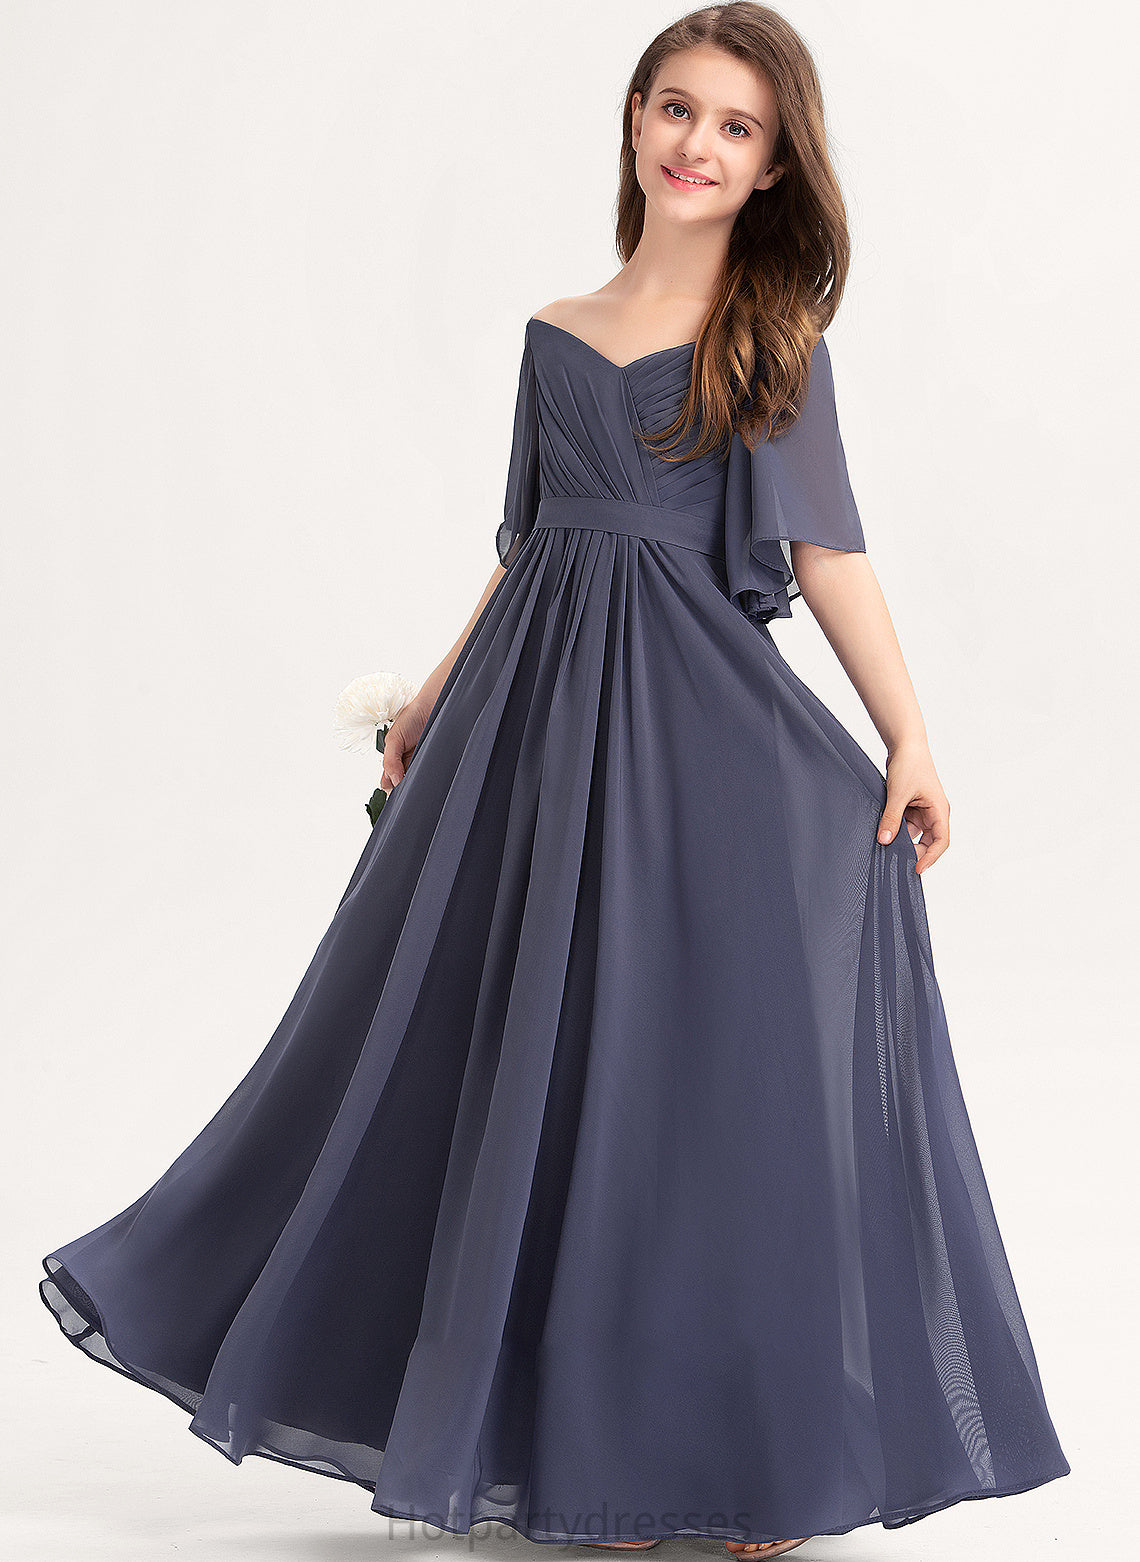 Ruffle Floor-Length Jaelyn Chiffon A-Line Off-the-Shoulder Junior Bridesmaid Dresses With Bow(s)